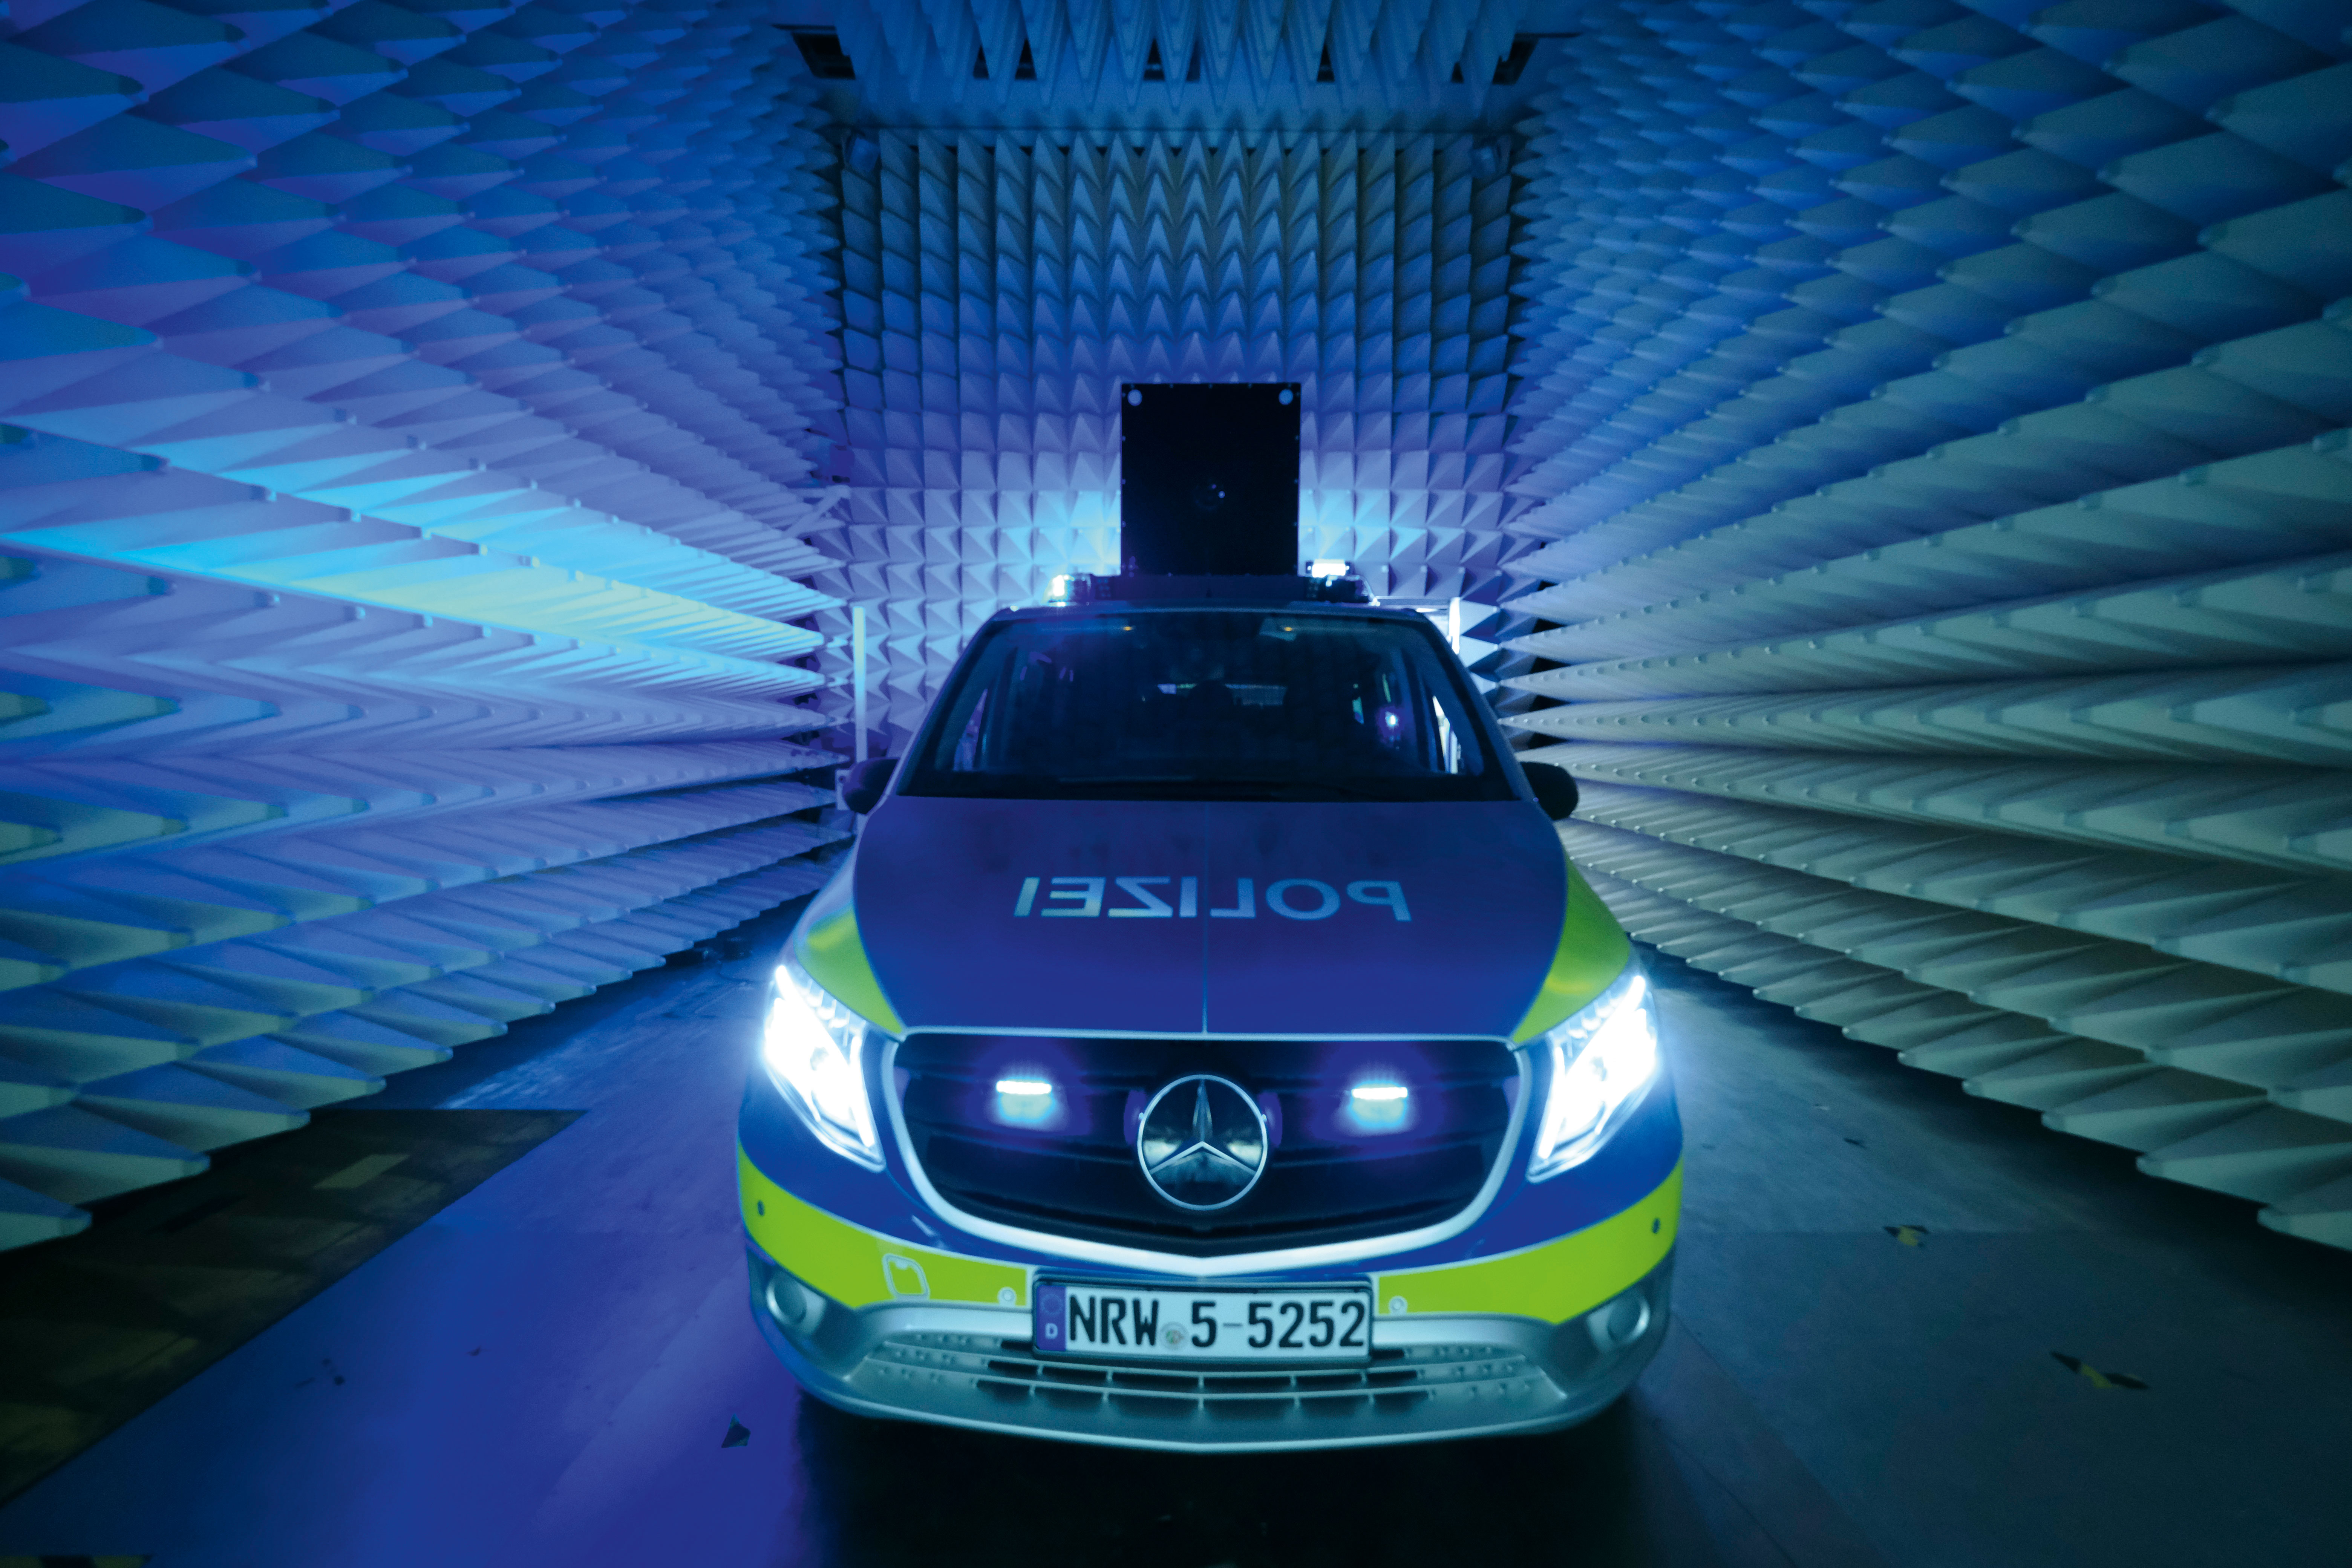 Police cars of the future could soon be small IT centers